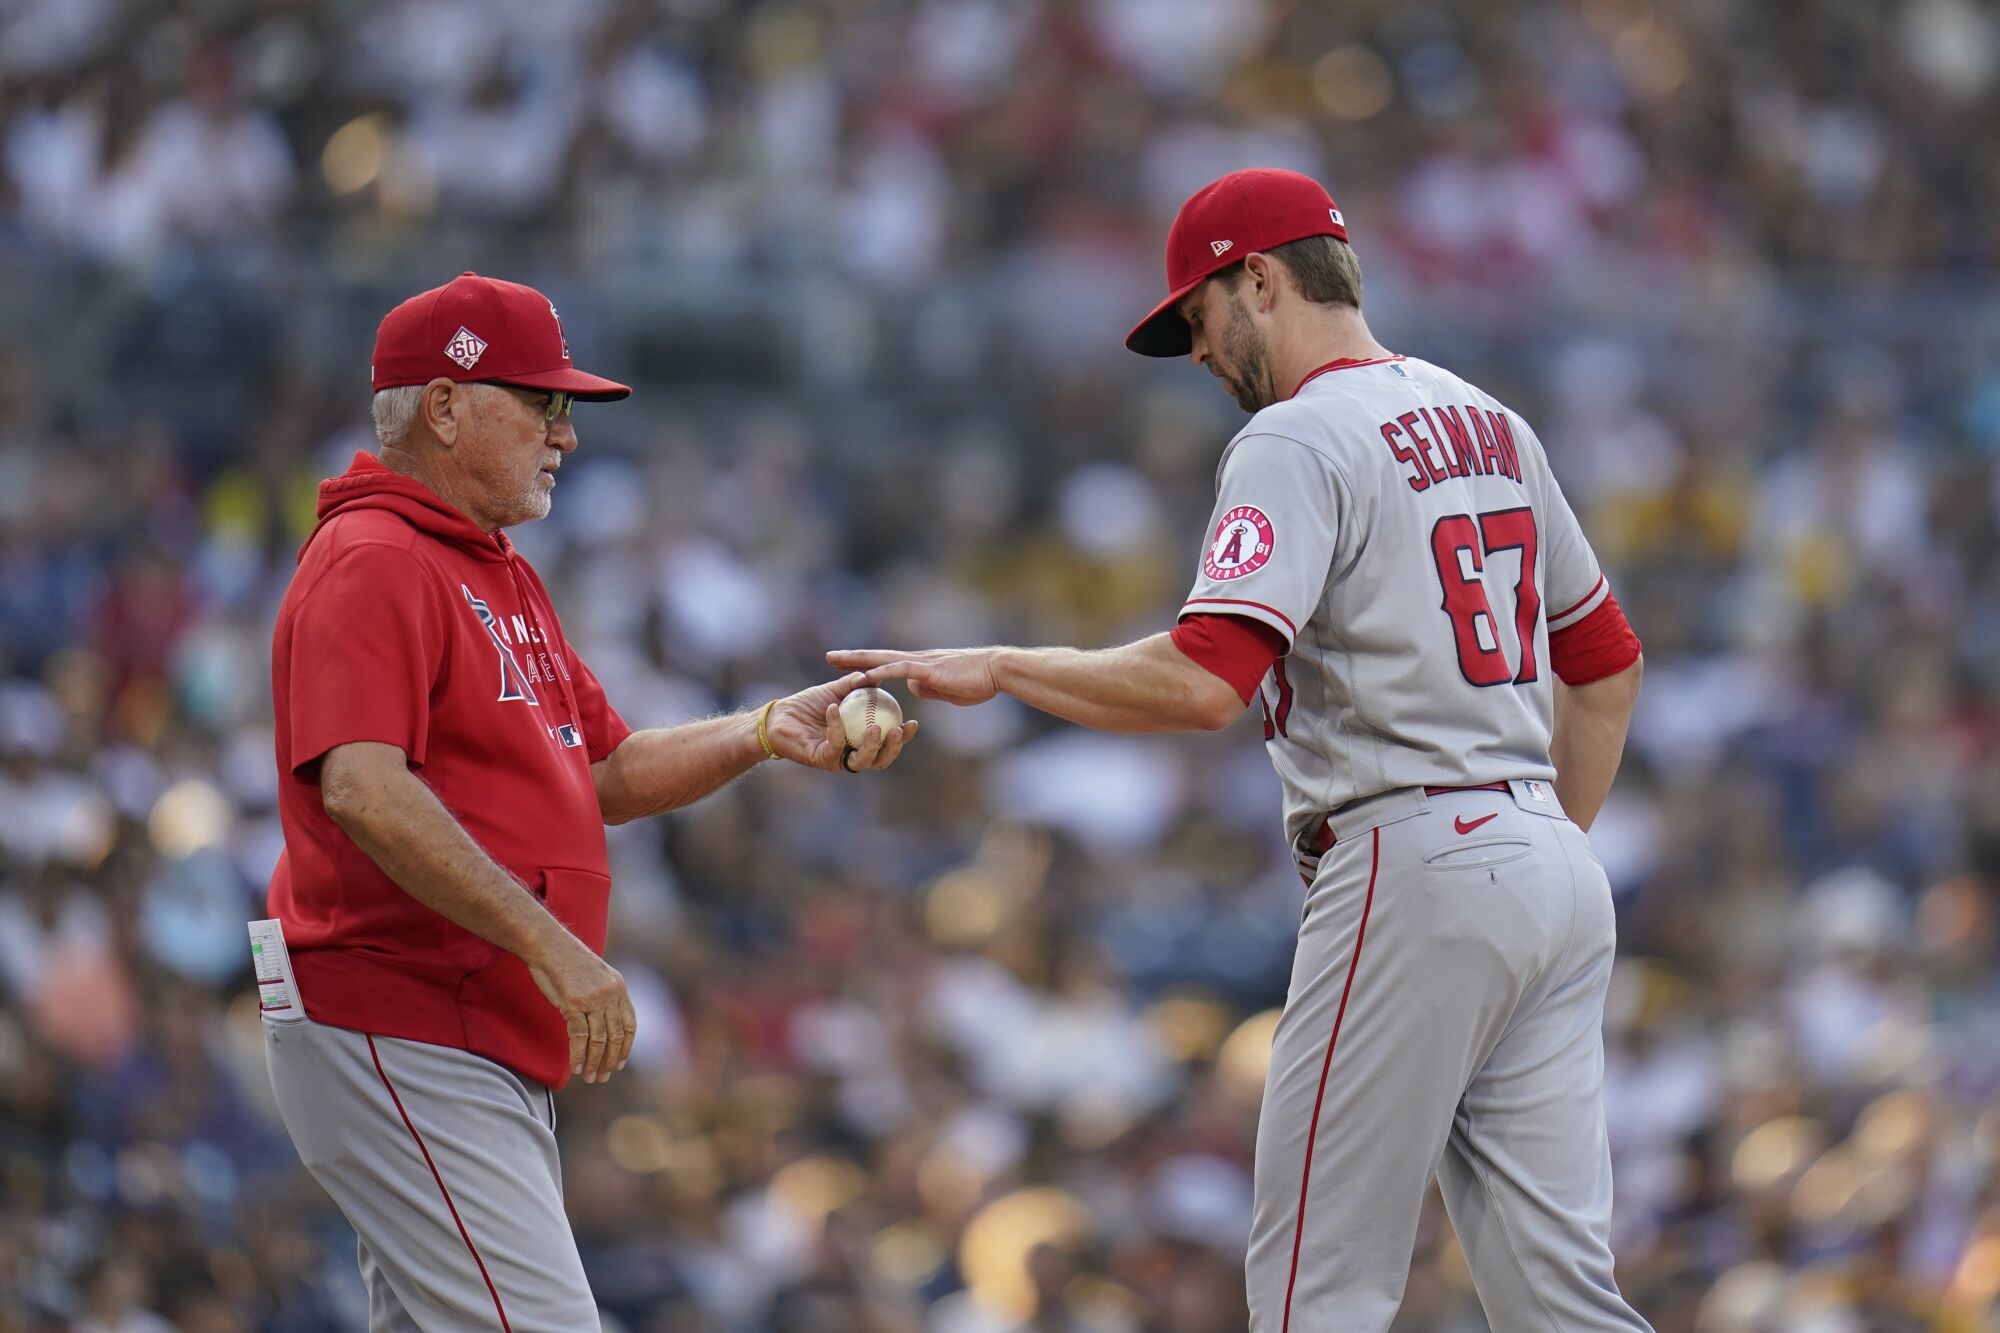 The Angels gave up eight runs in the second inning Wednesday in a loss to the Padres. (AP Photo/Gregory Bull)